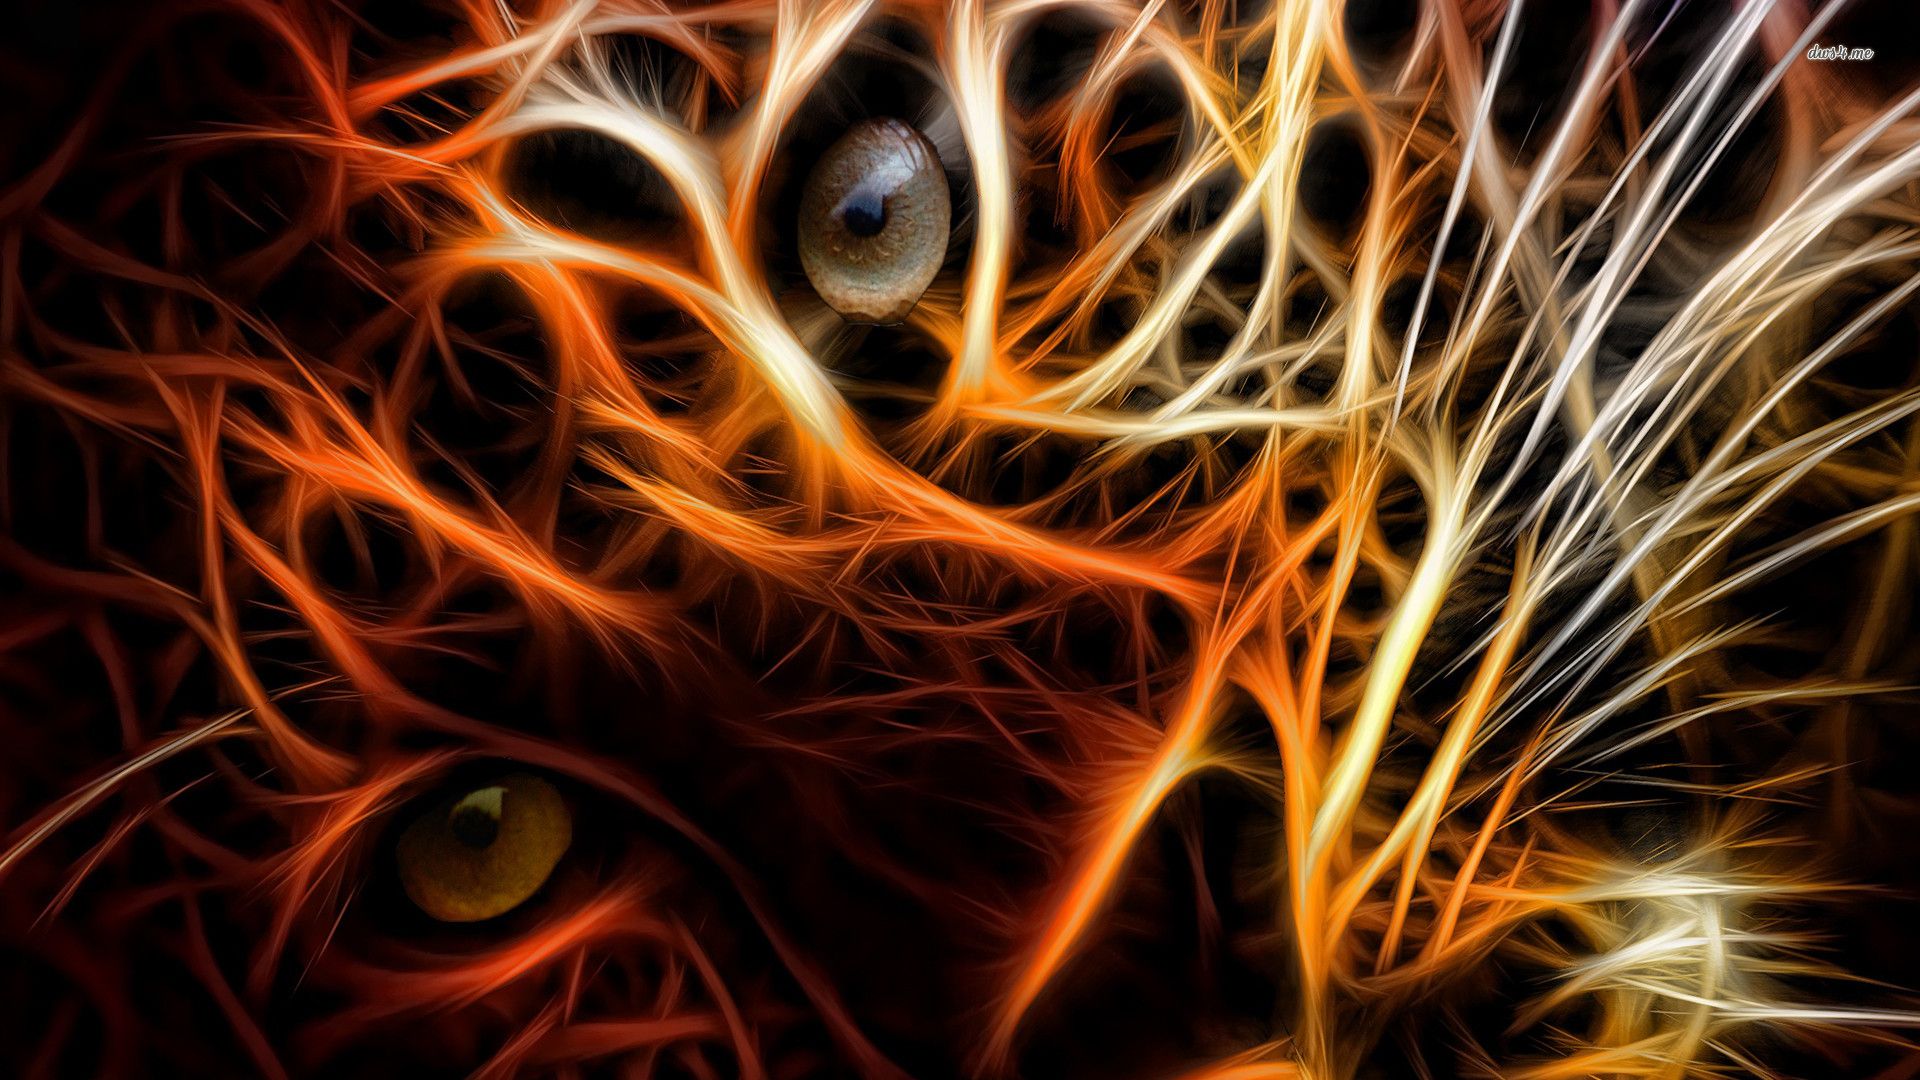 A digital art of an orange and yellow cat - Tiger